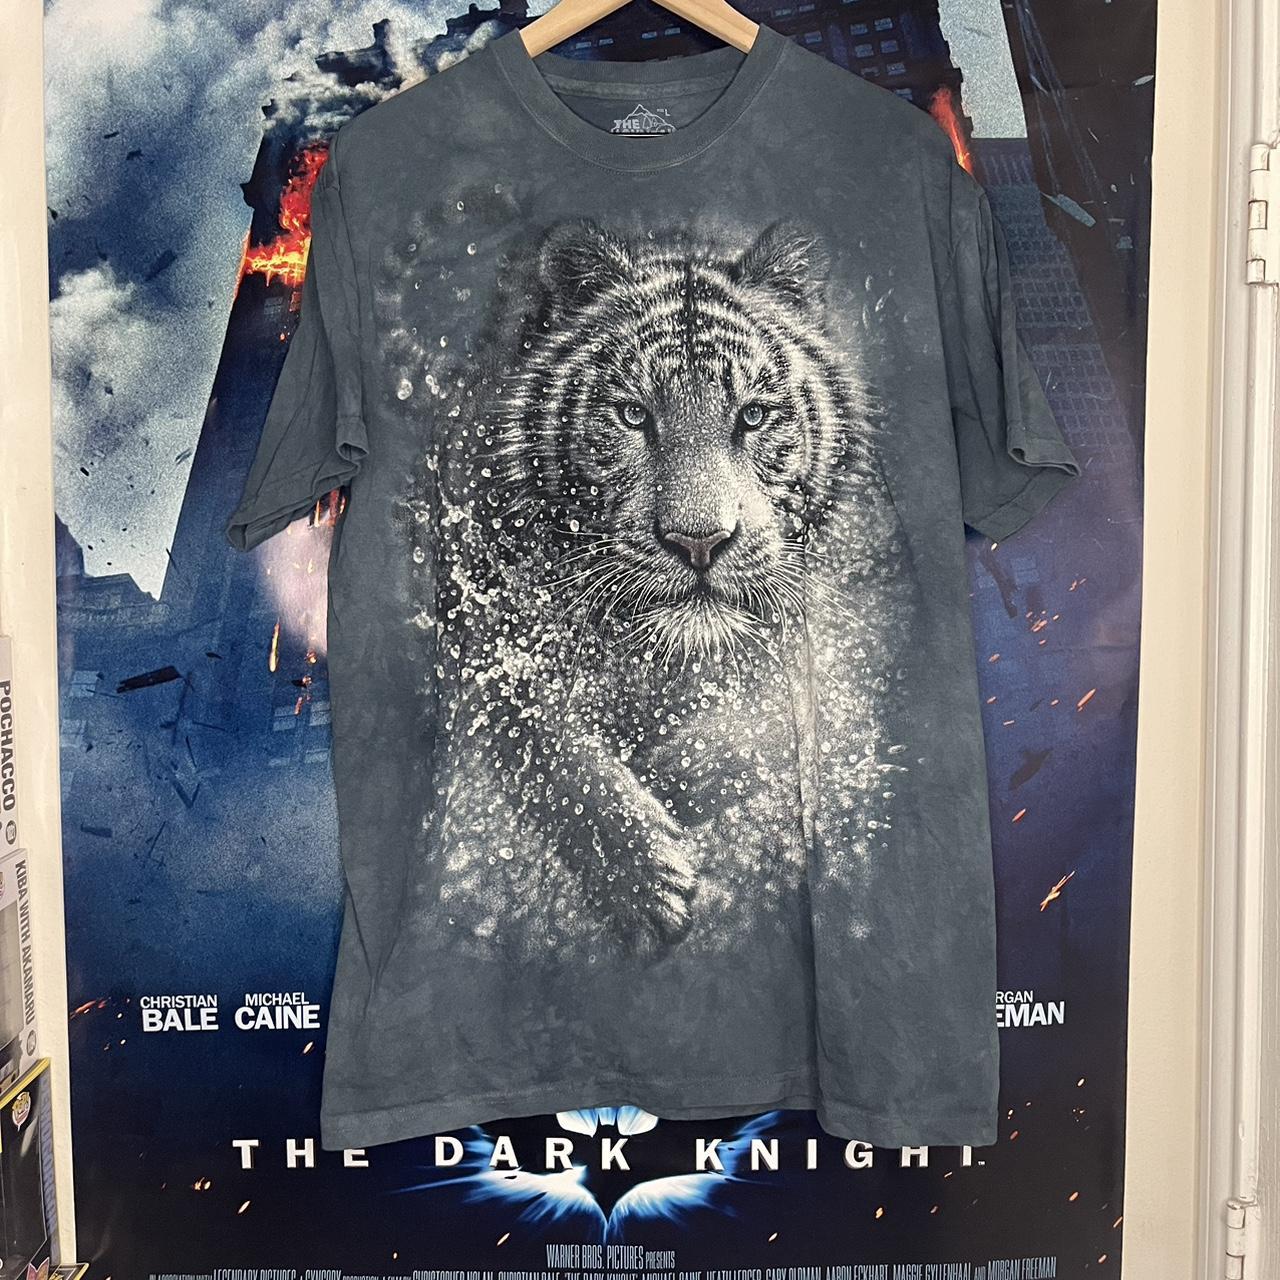 The Mountain lion shirt Tagged large 22x28 No... - Depop